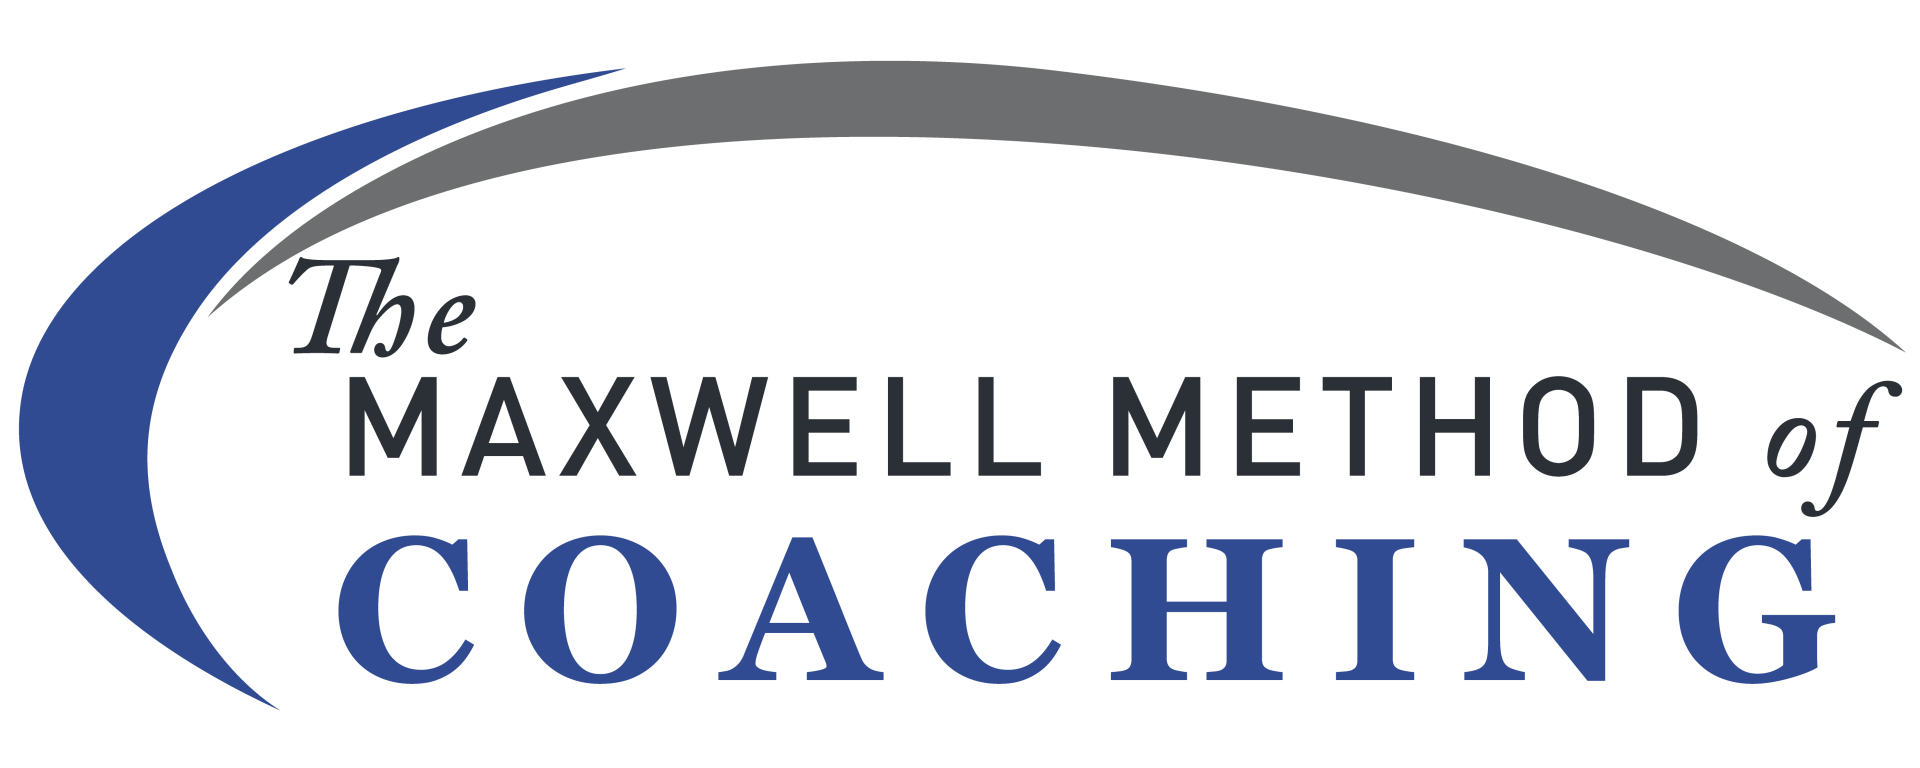 THE MAXWELL METHOD OF COACHING